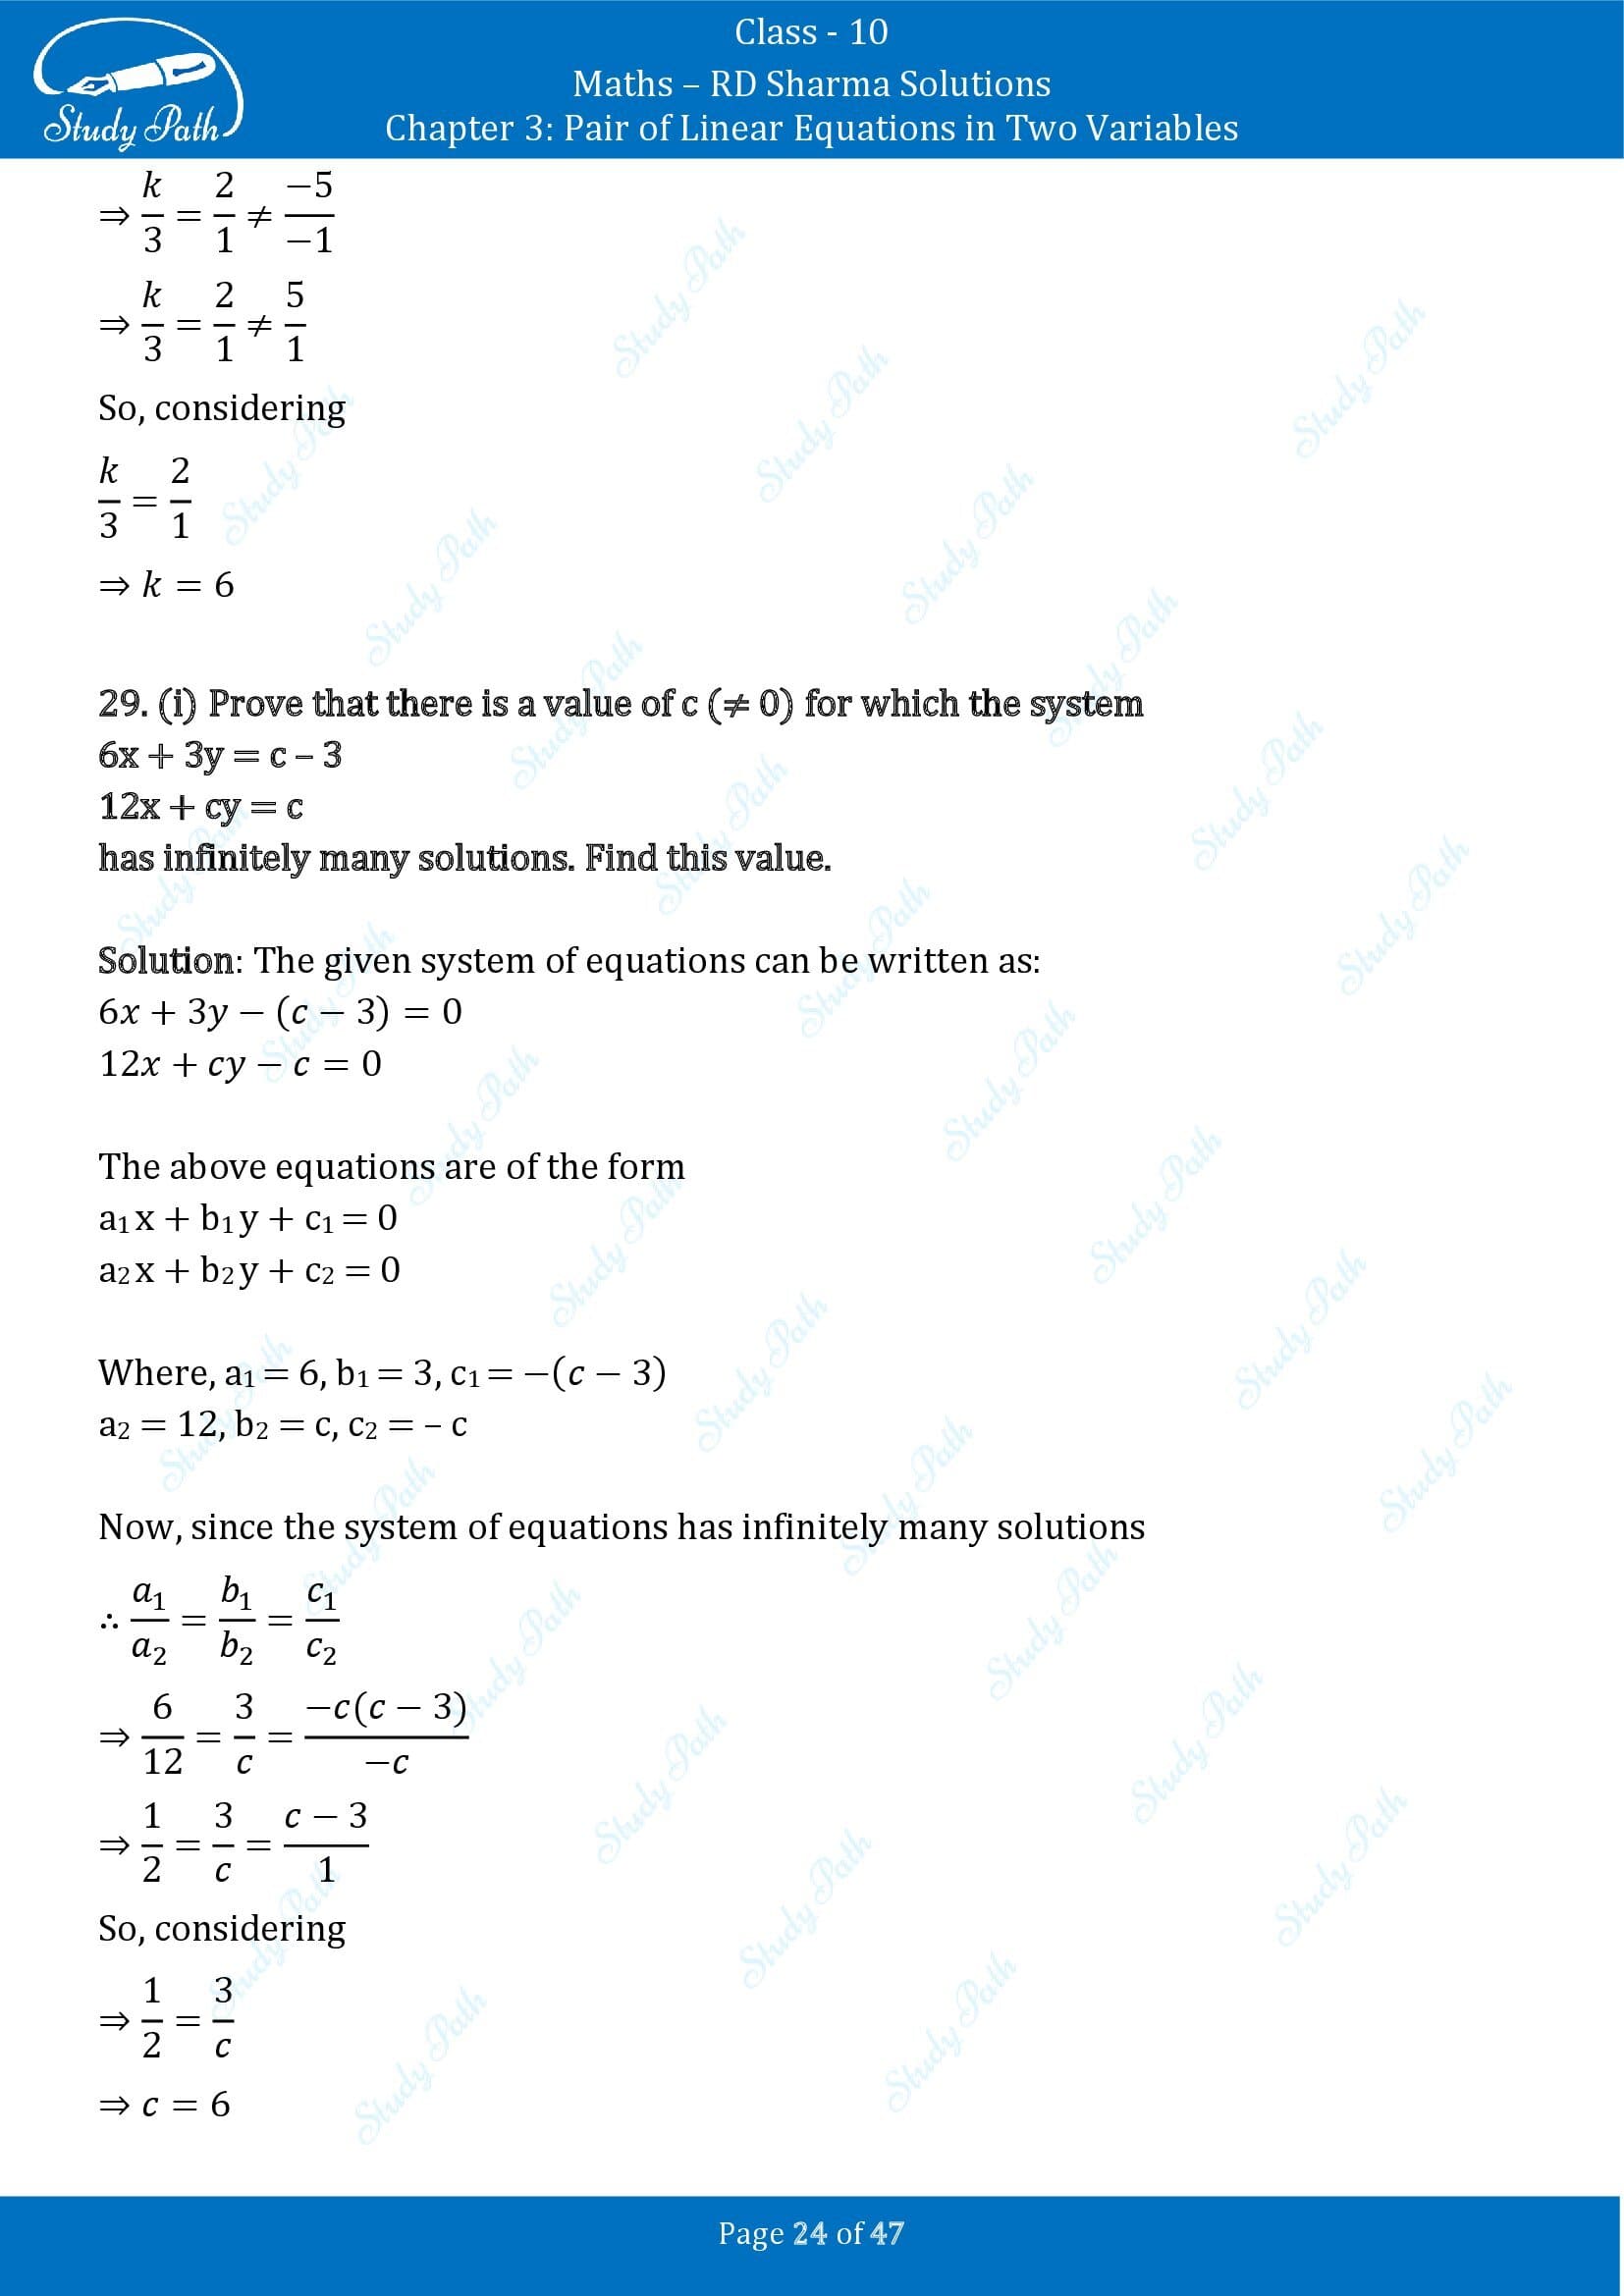 RD Sharma Solutions Class 10 Chapter 3 Pair of Linear Equations in Two Variables Exercise 3.5 00024